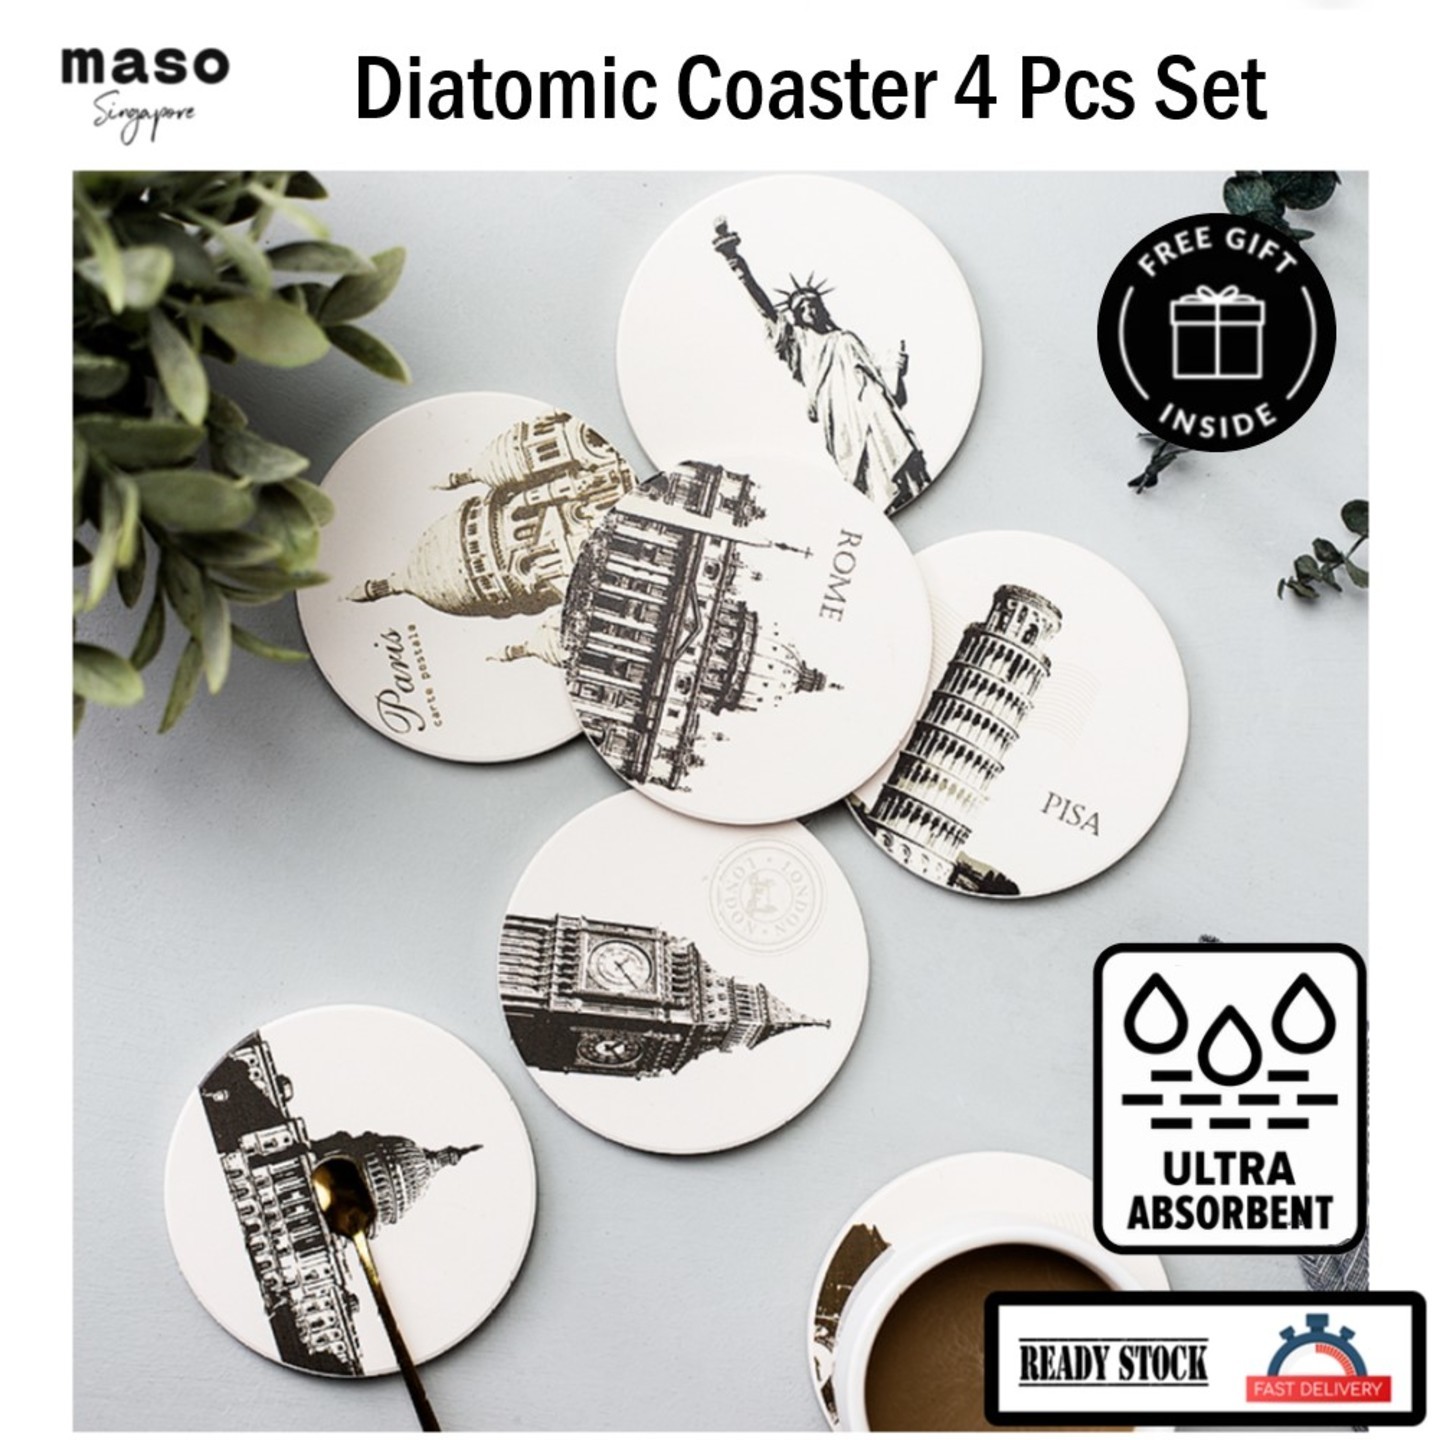 Famous Building Diatomite Round Coasters Set - Fast Absorption, Non Slip Cork Base, High Heat Resistant 4 Coasters Set